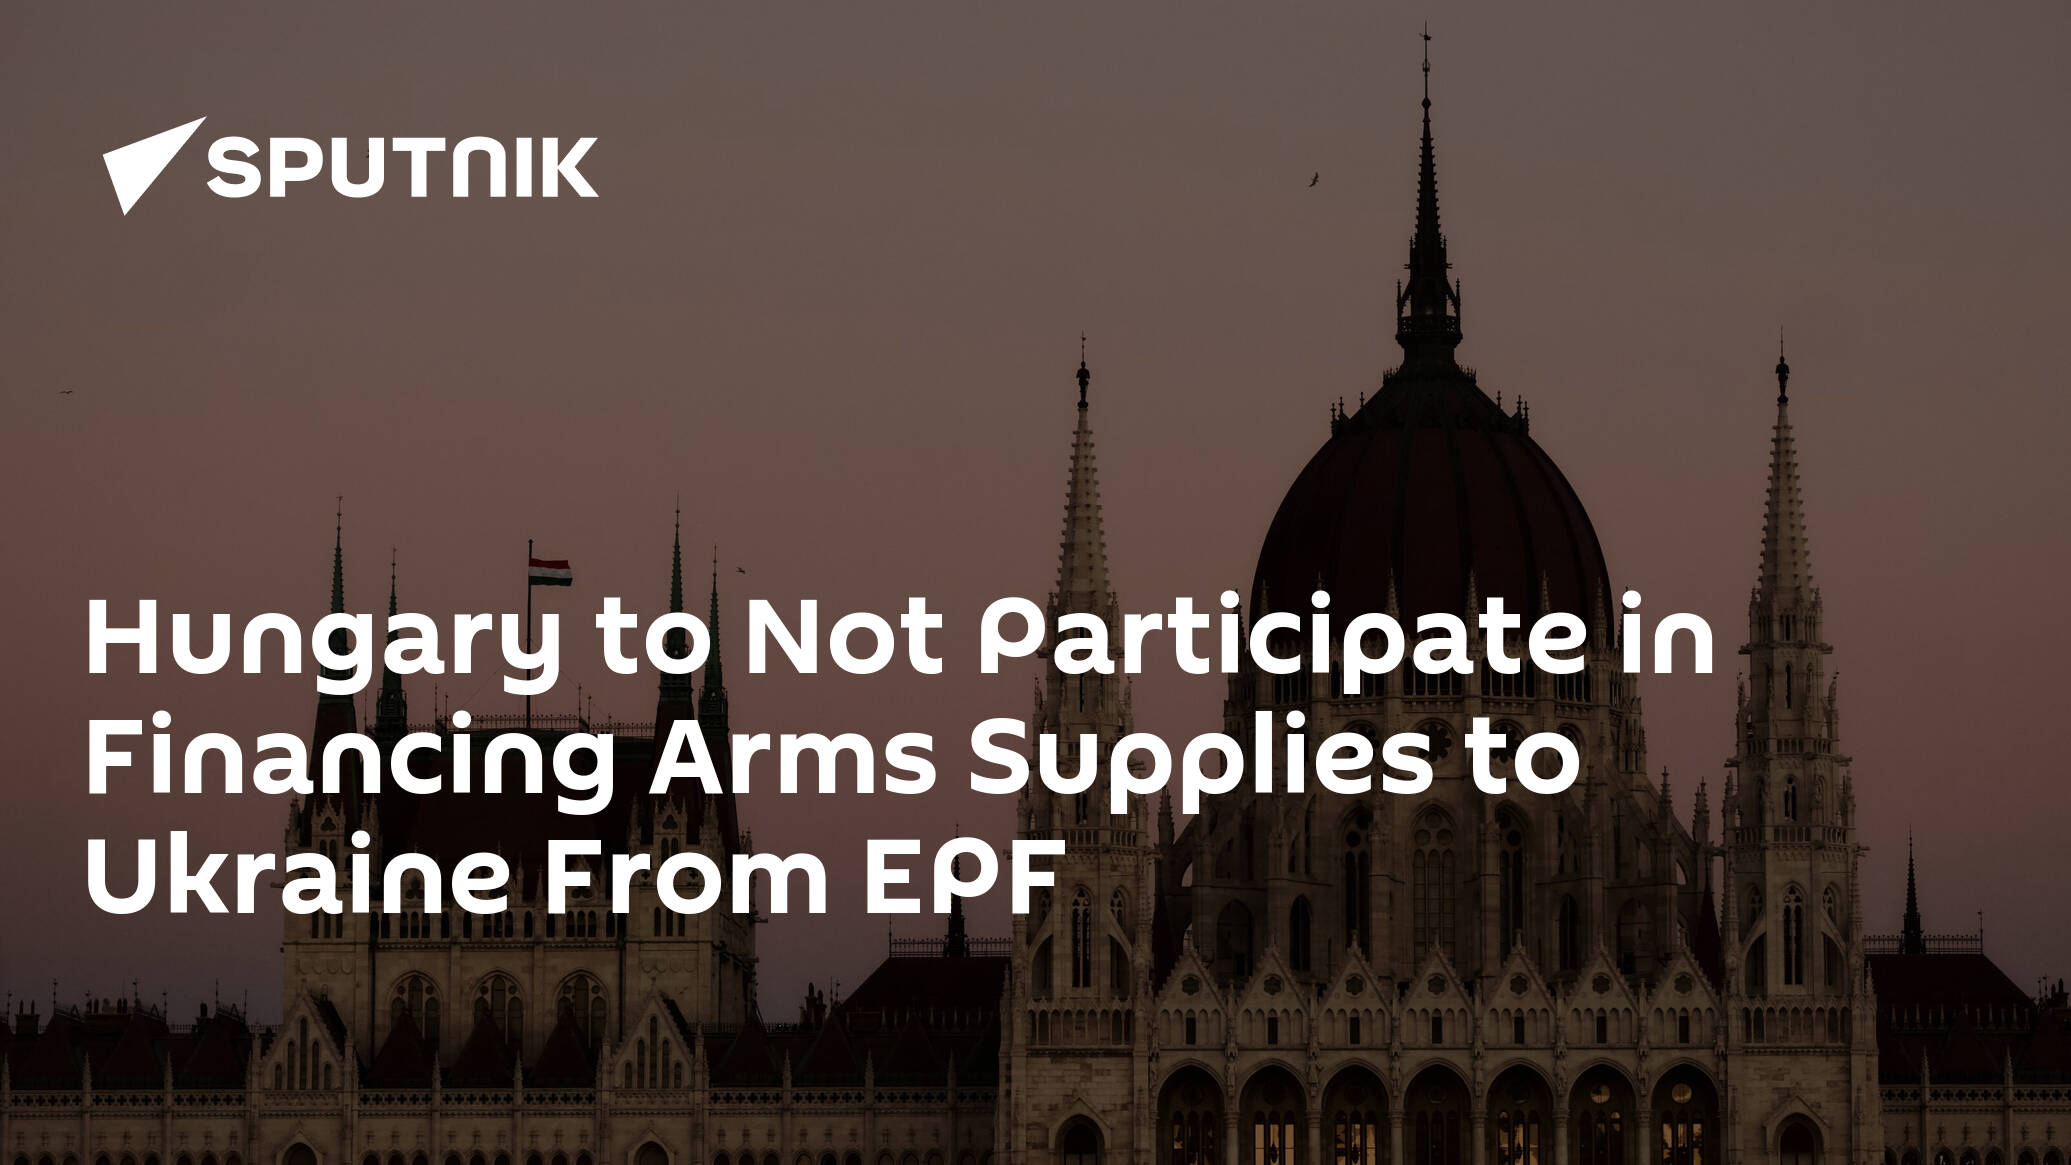 Hungary to Not Participate in Financing Arms Supplies to Ukraine From EPF